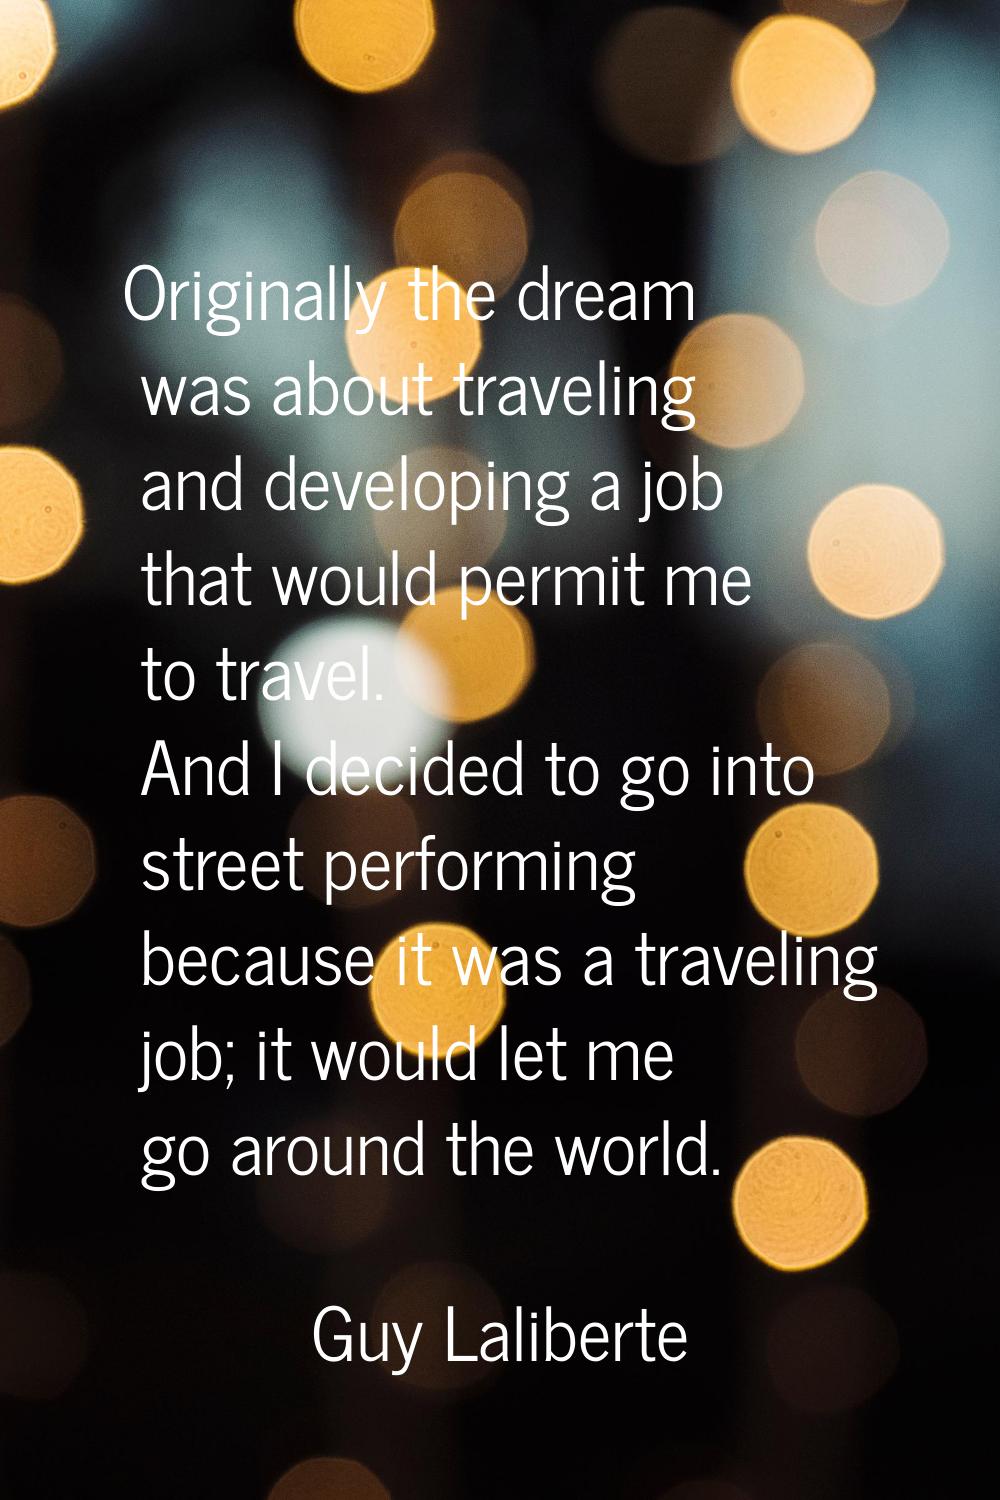 Originally the dream was about traveling and developing a job that would permit me to travel. And I